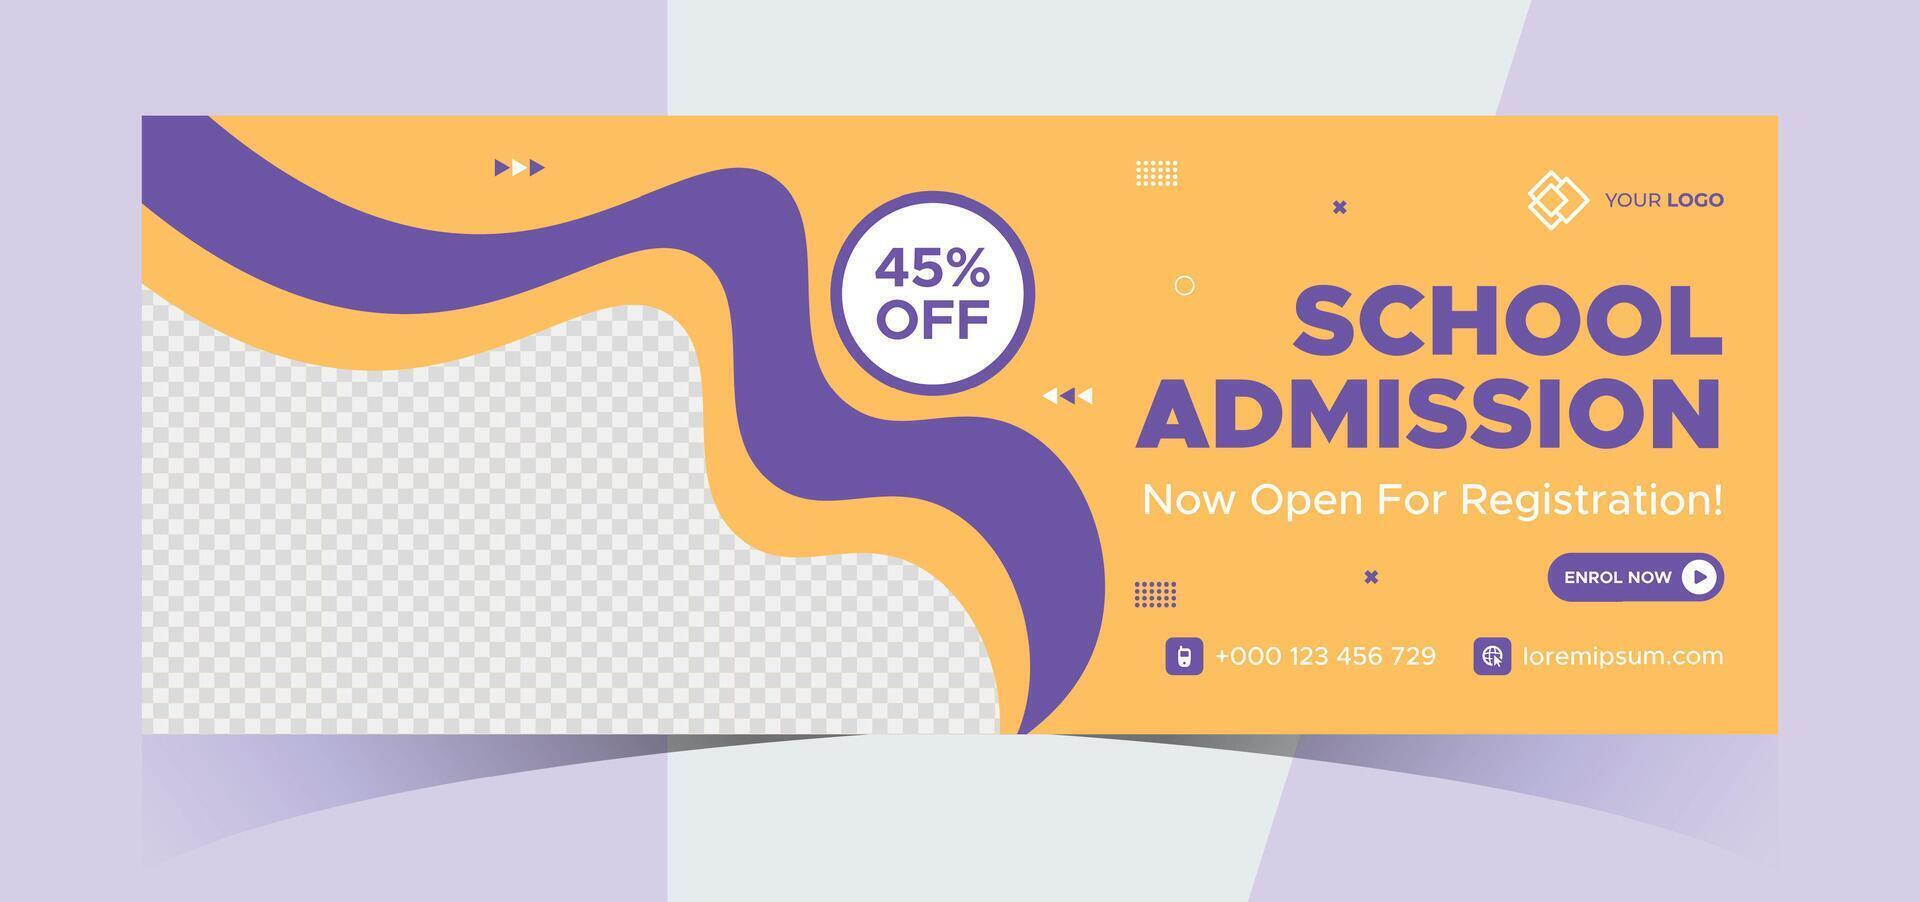 school admission social media photo cover and web banner. Back to school online education web banner template. Kids education e-learning design for post, flyer, brochure, poster, website, header vector